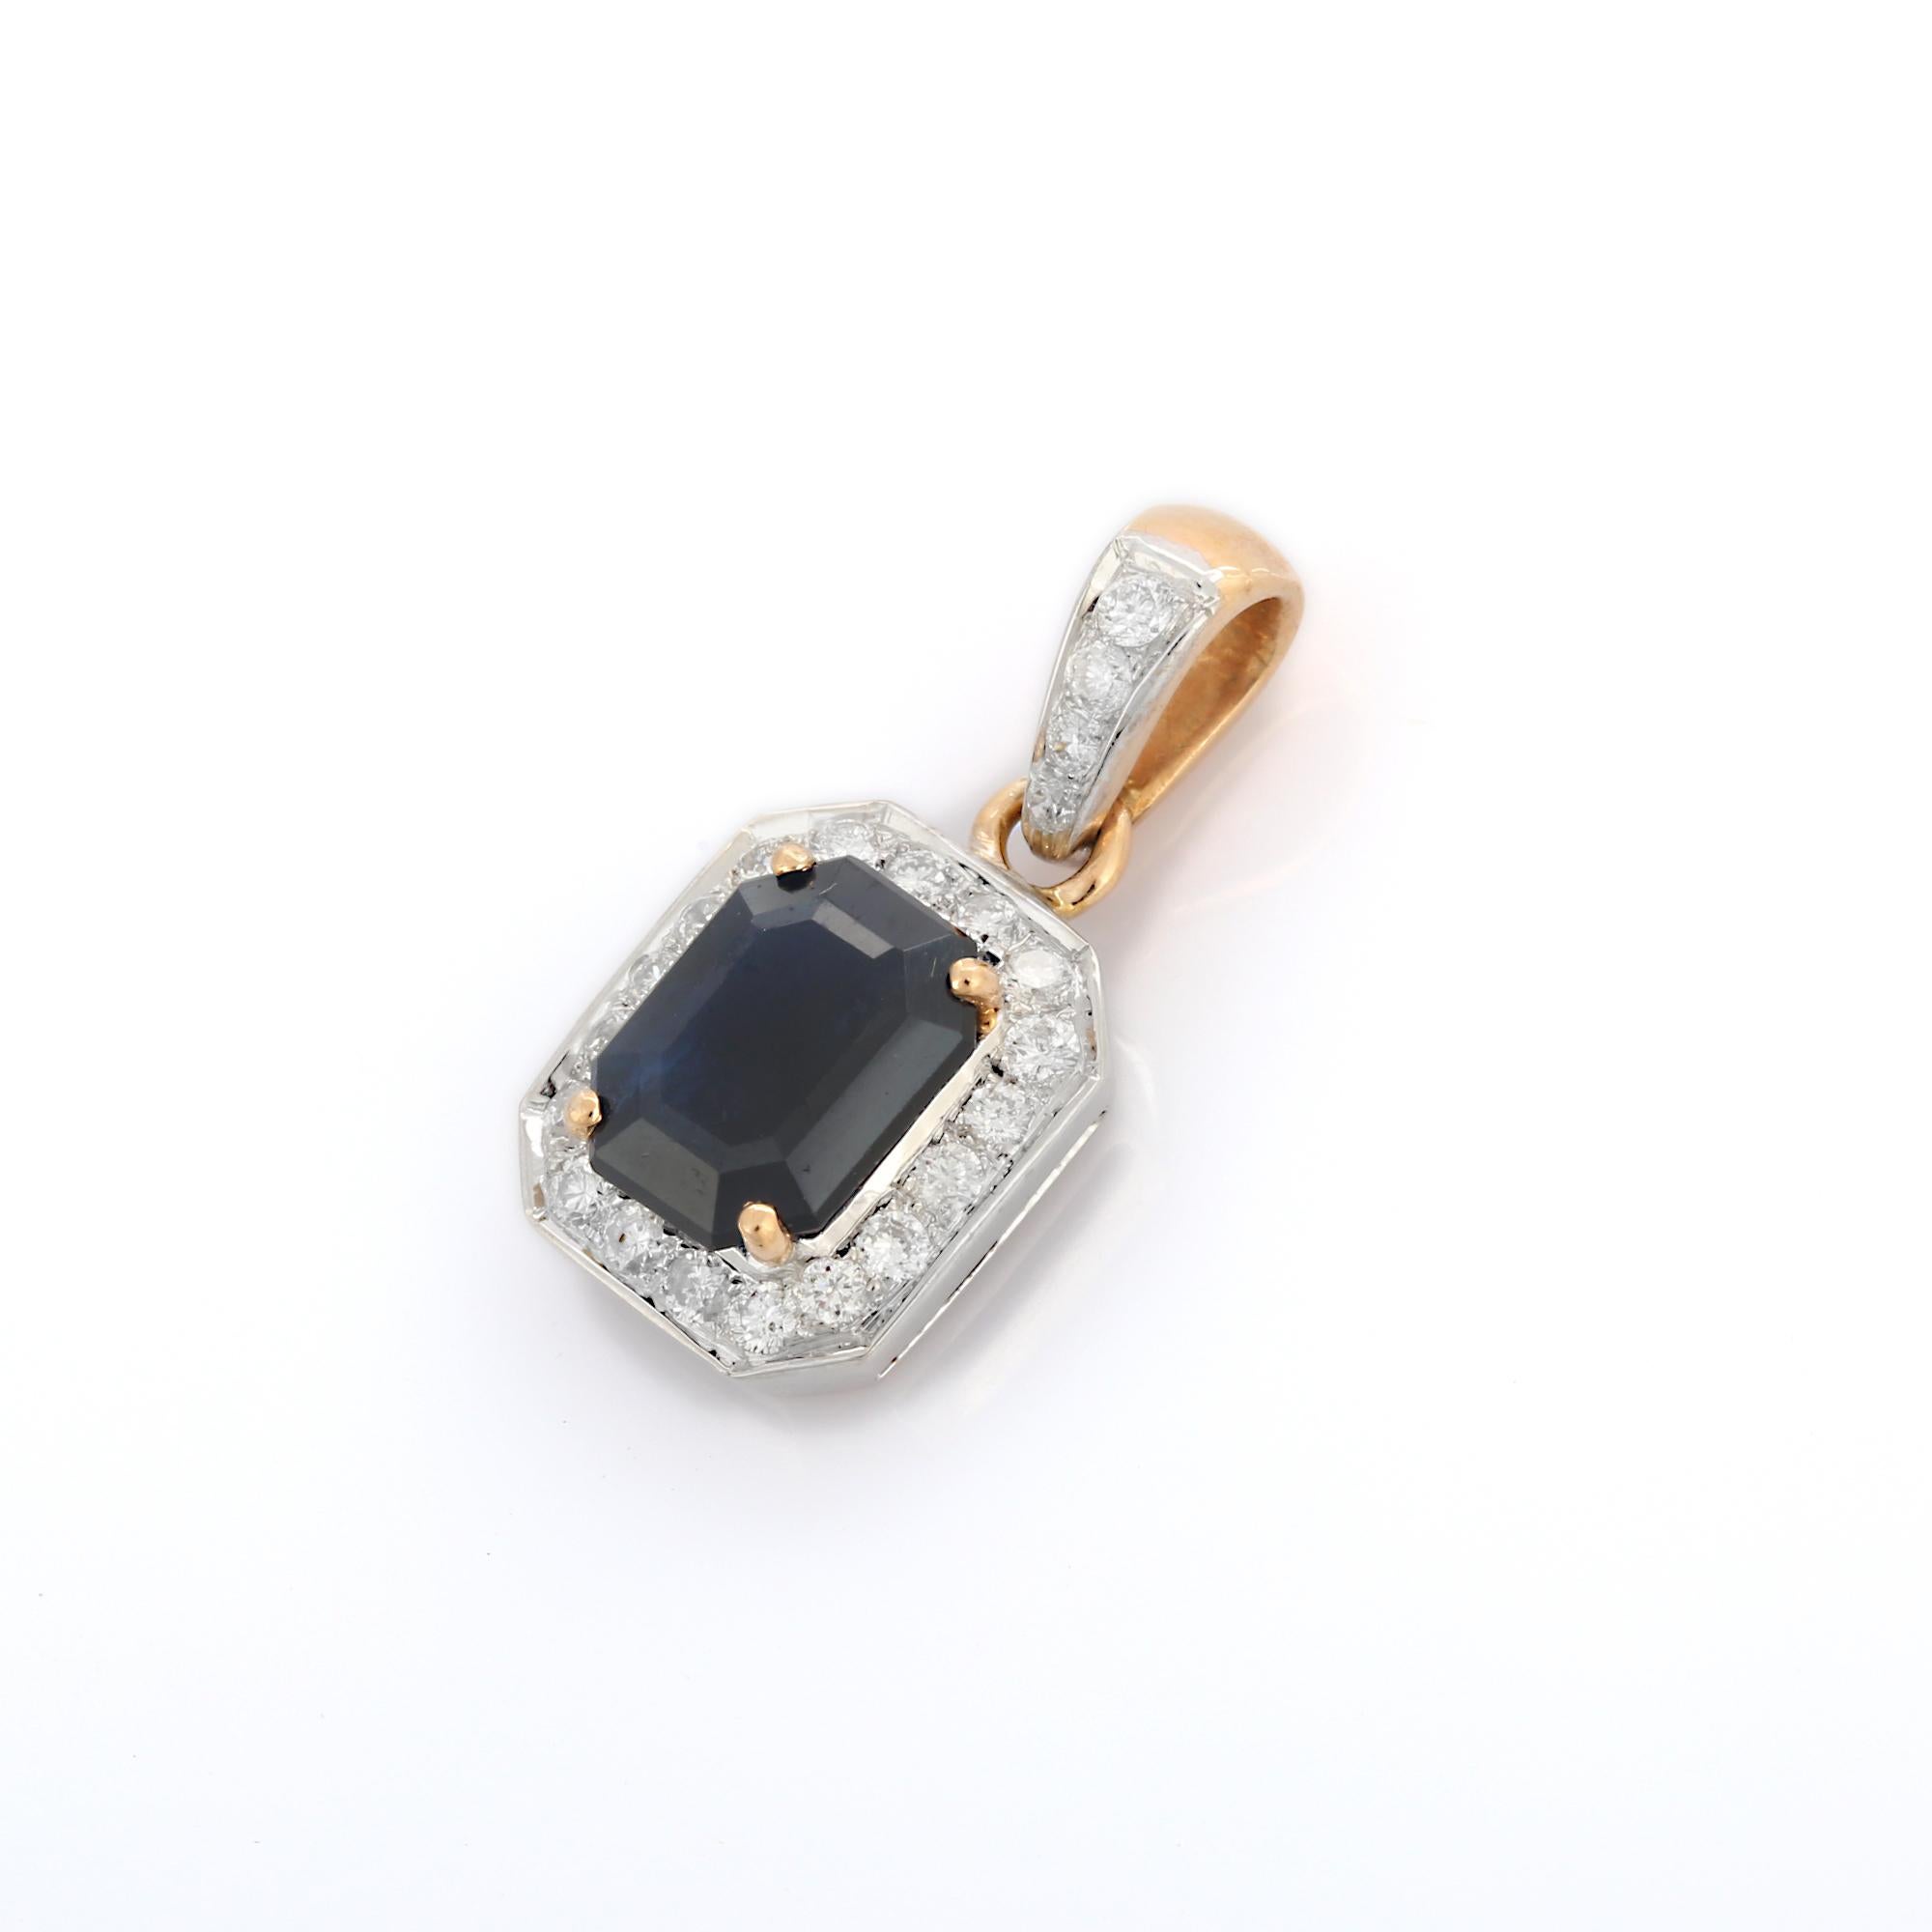 2.27 Ct Blue Sapphire Solitaire Pendant with Diamonds in 18K White Gold In New Condition For Sale In Houston, TX